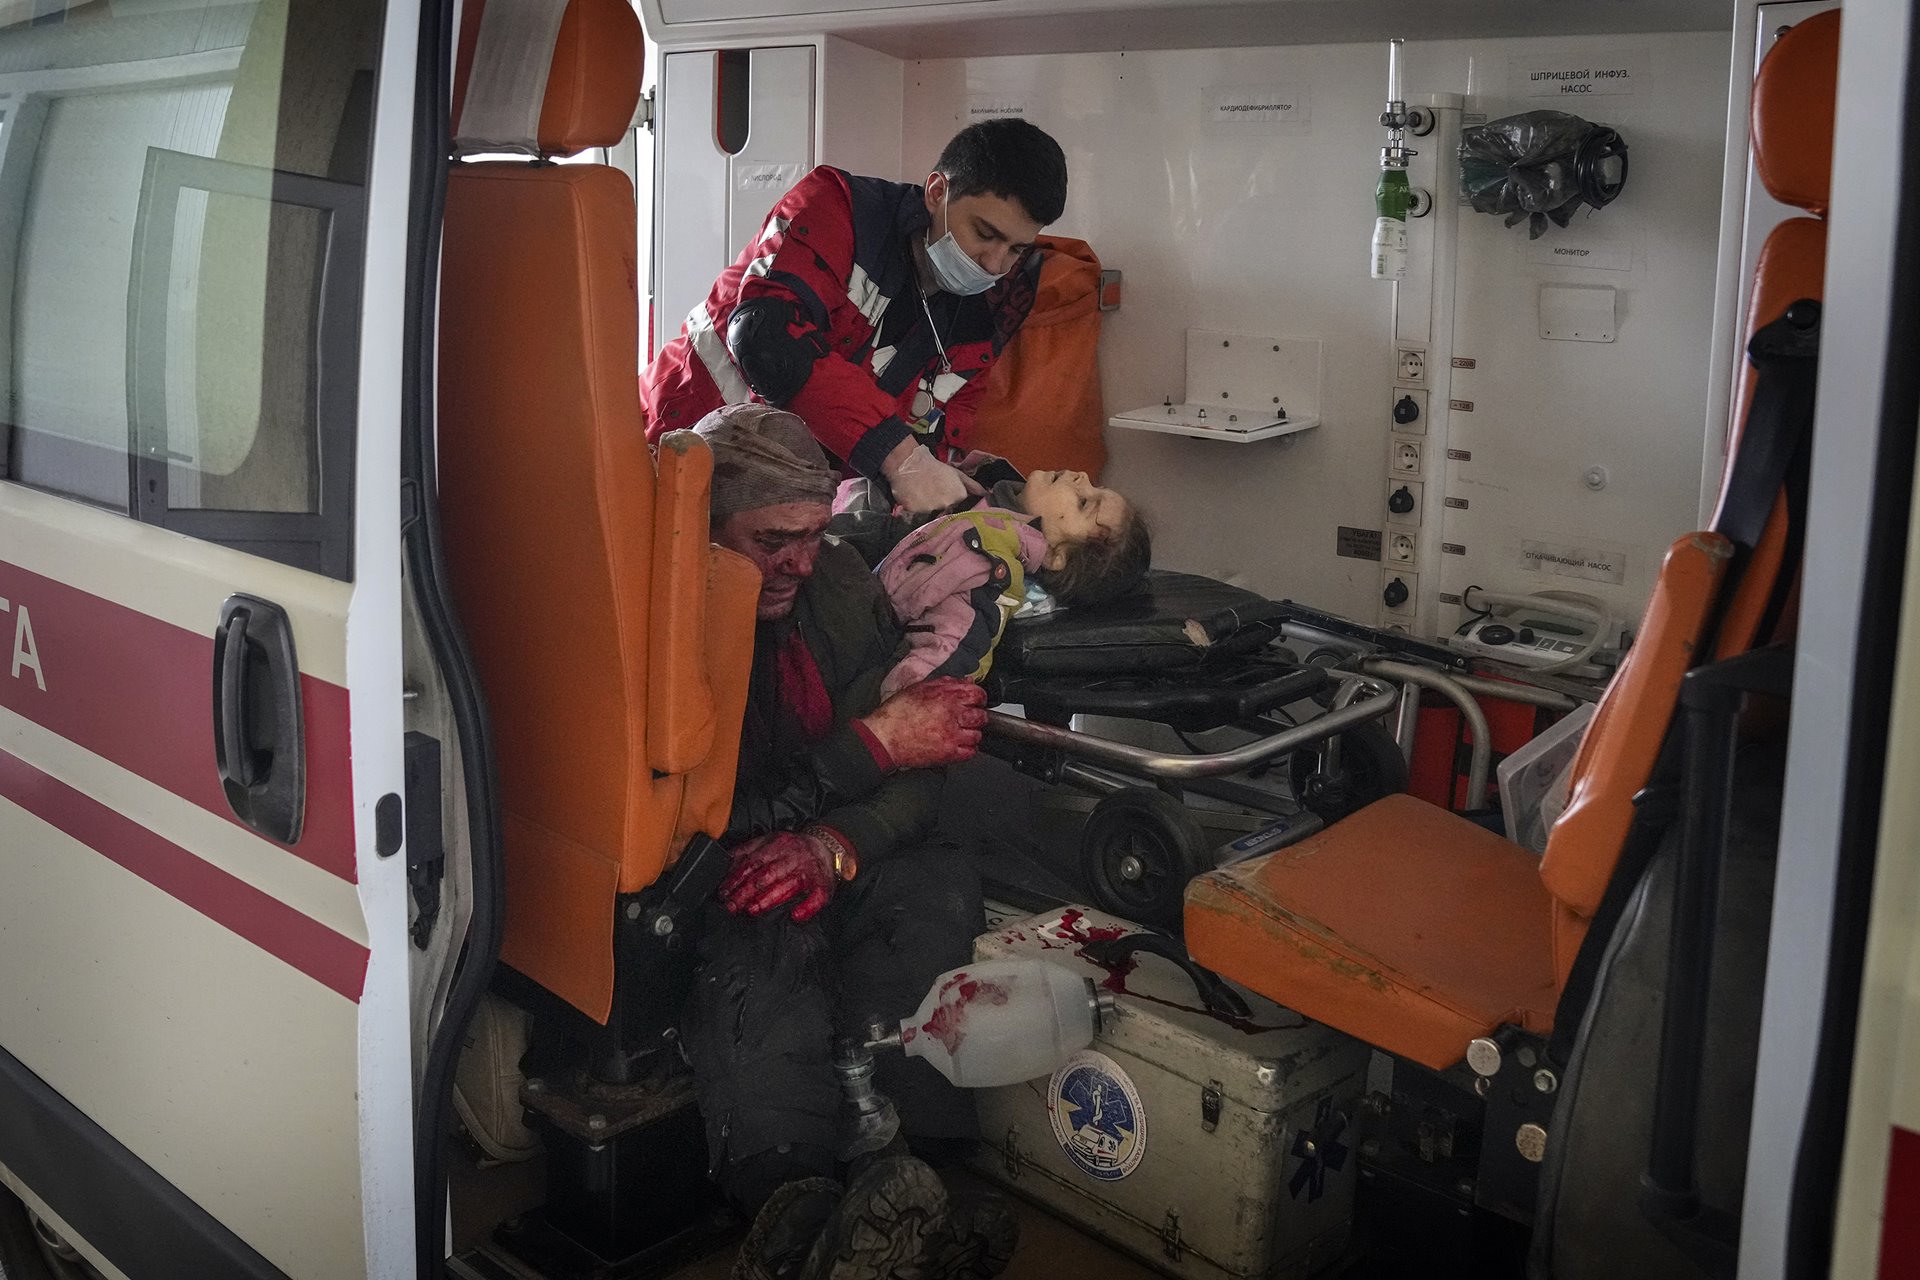 Oleksandr Konovalov, an ambulance paramedic, performs CPR on Evangelina (3), injured during shelling of a residential area in Mariupol, Ukraine, as her father sits alongside. Evangelina did not survive.